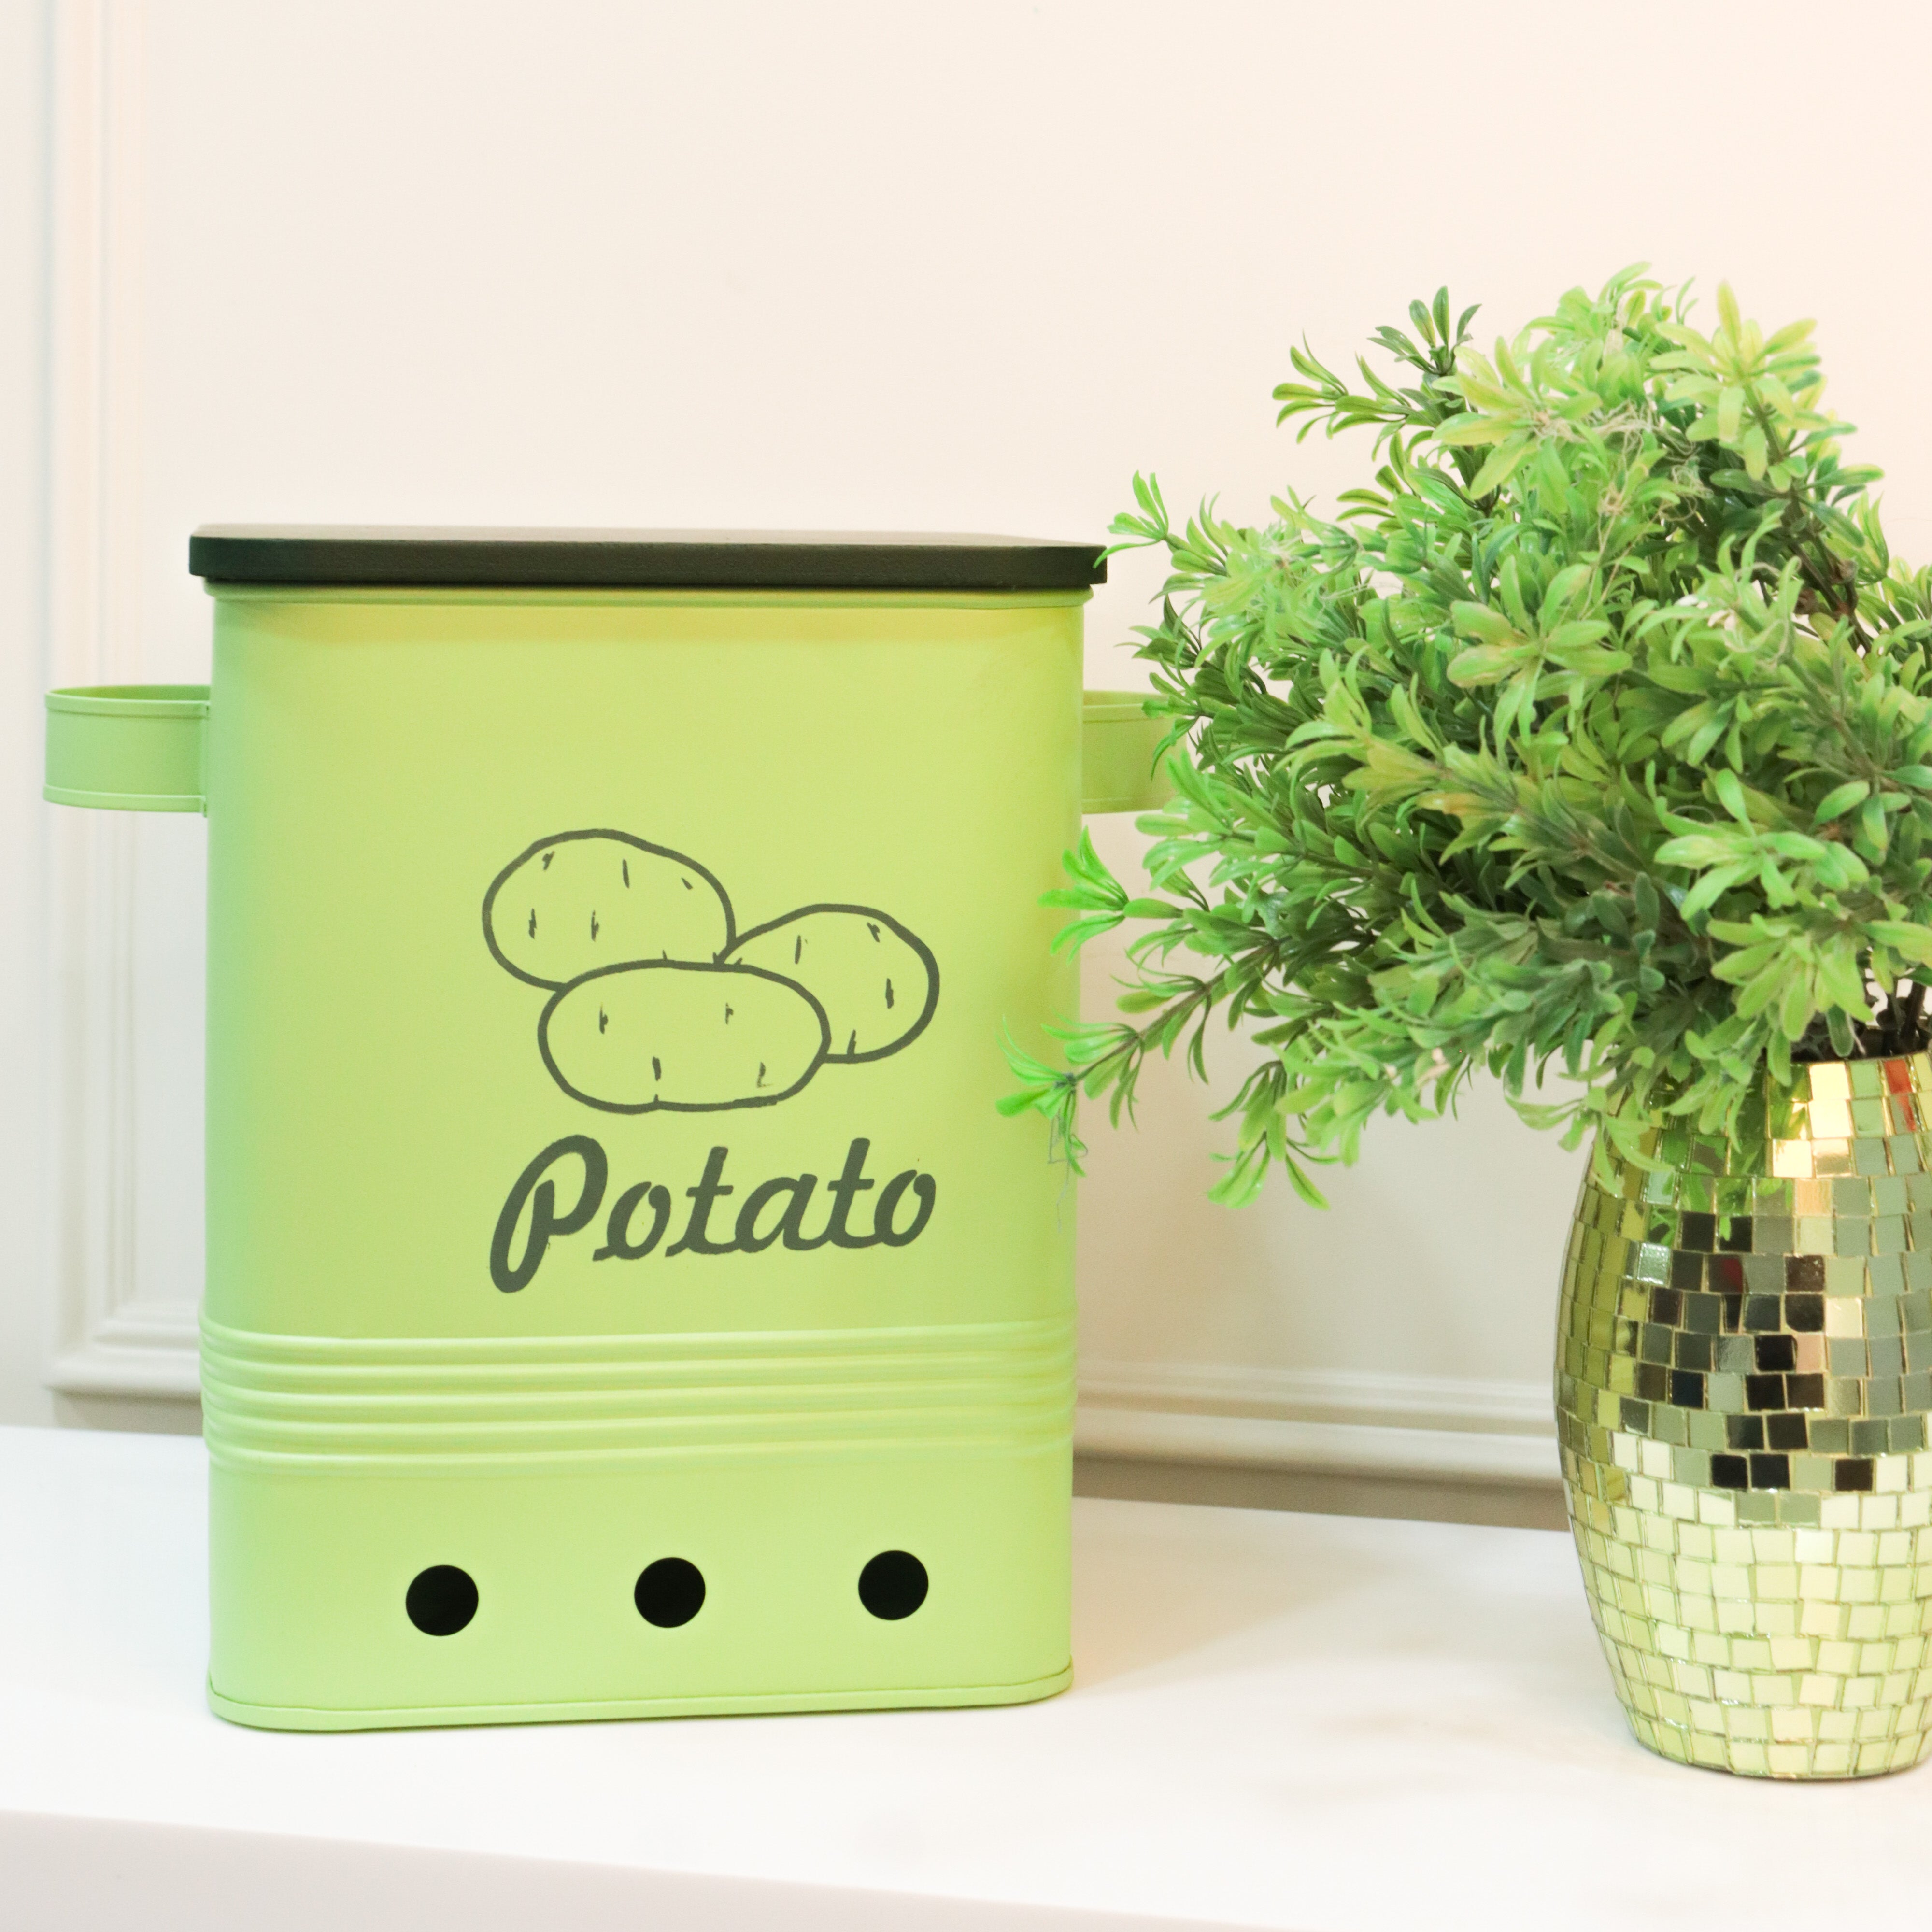 Square potato box with wooden Lid